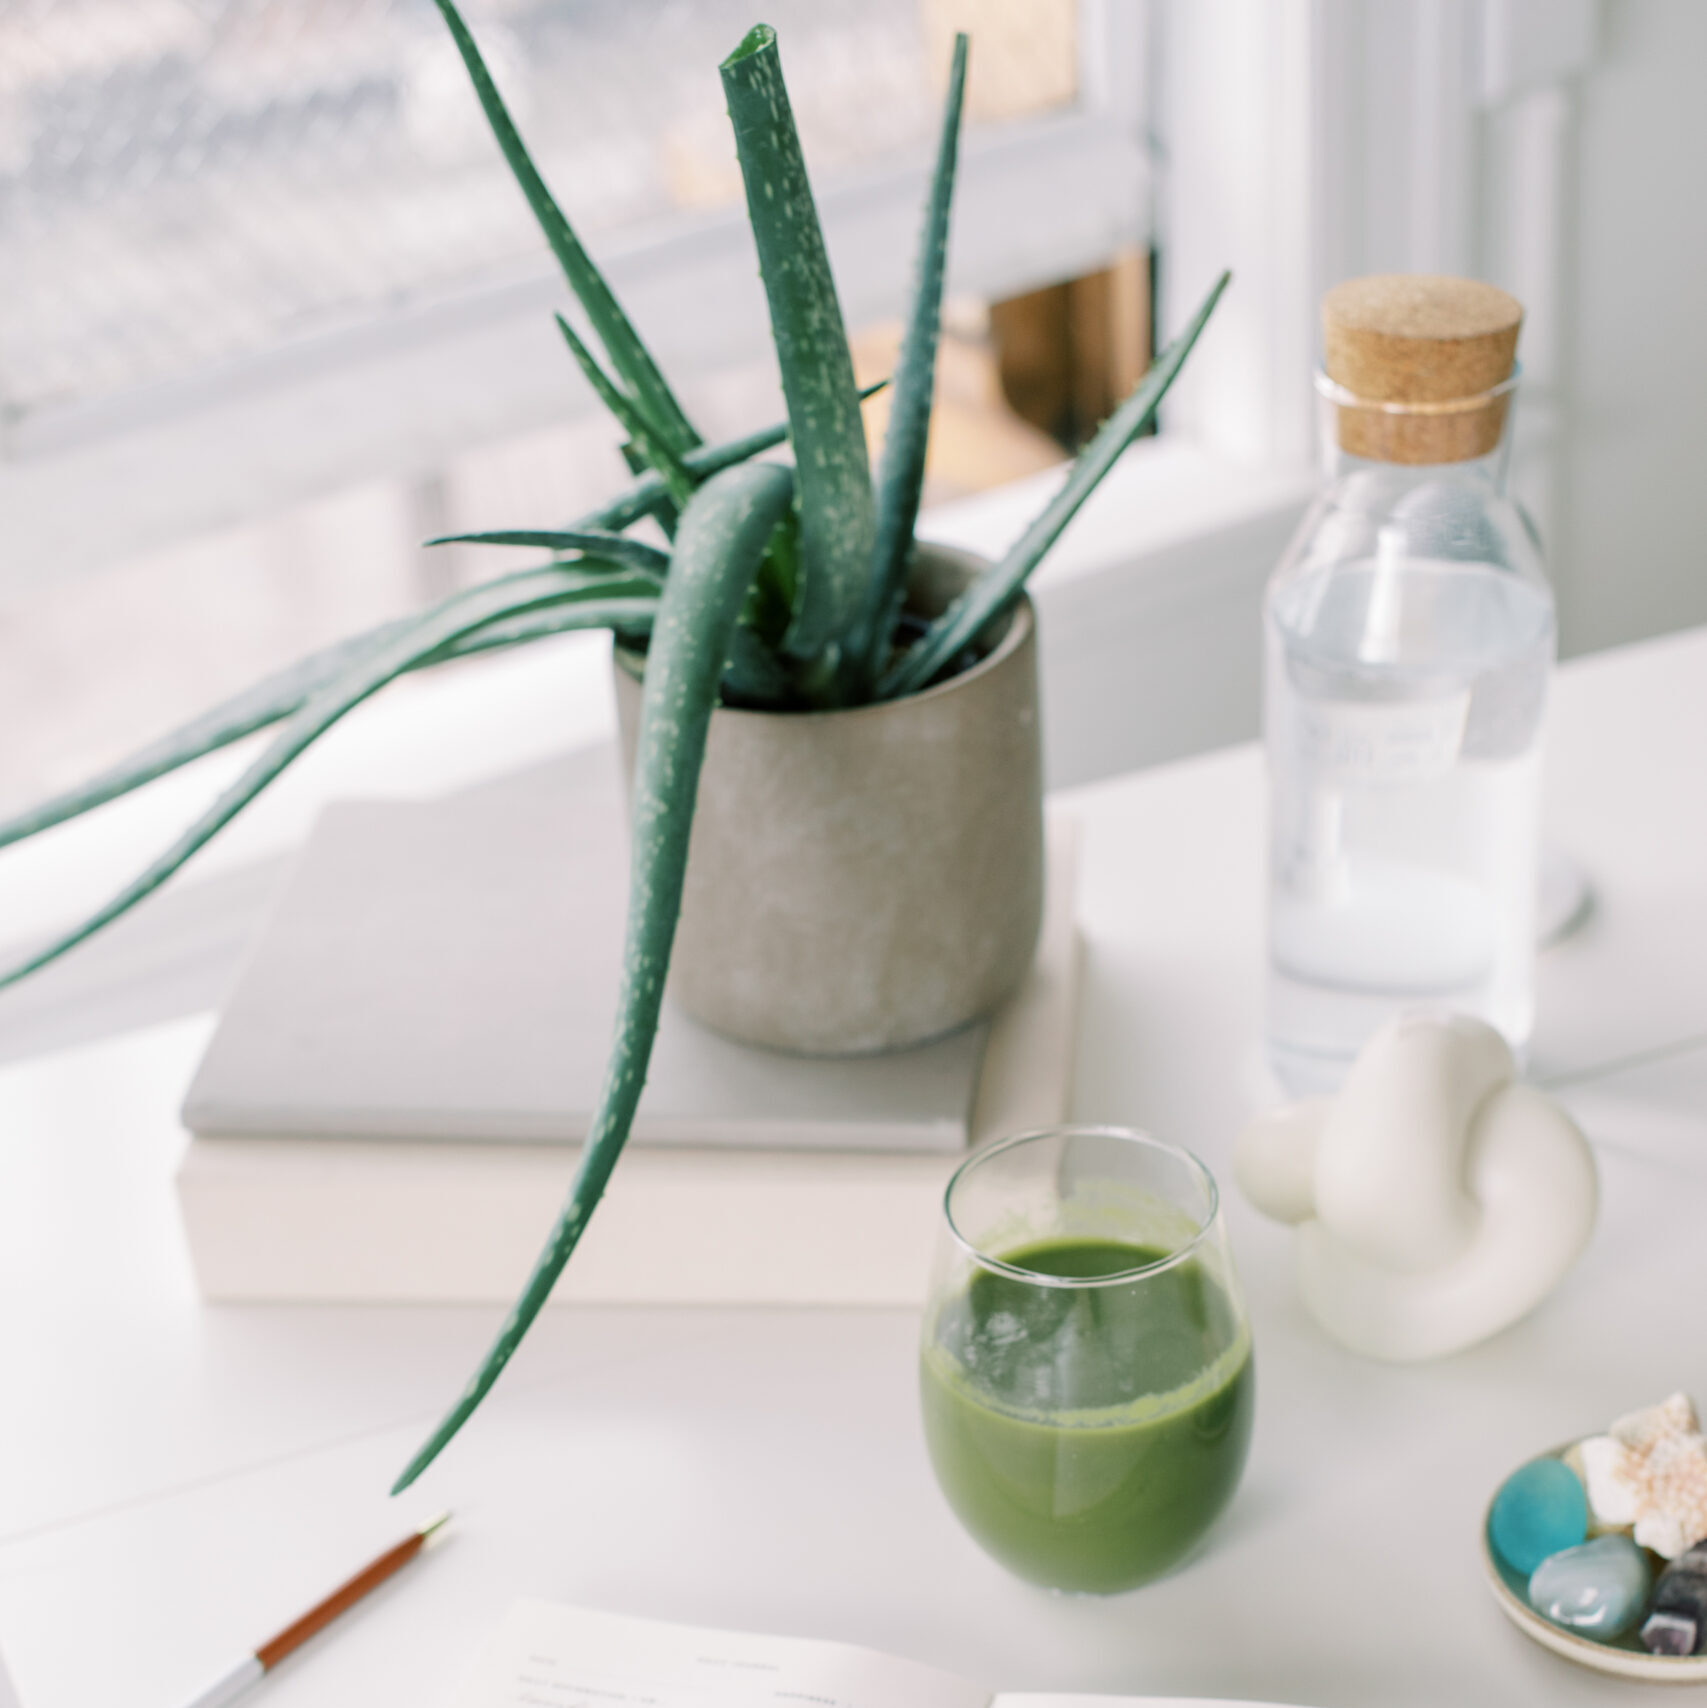 health and wellness stock photo of green smoothie, water bottle, succulent plant, and calming desk decor